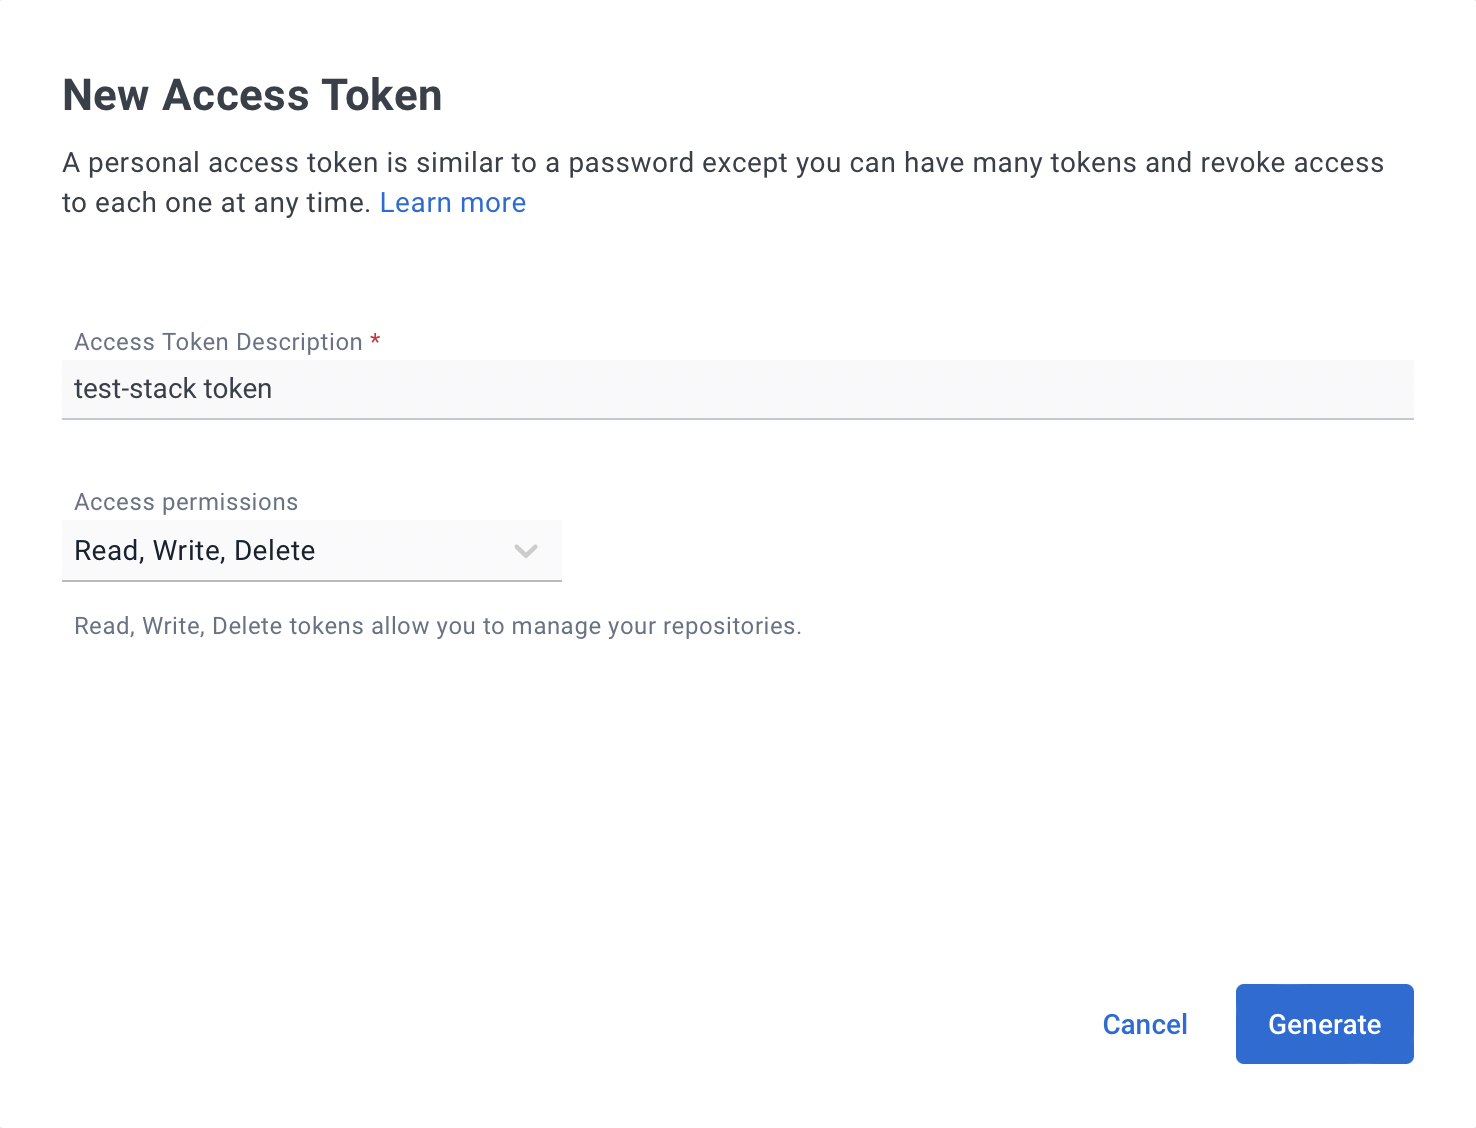 DockerHub - New Access Token page with the name field set to "my-jupyter-docker-token"